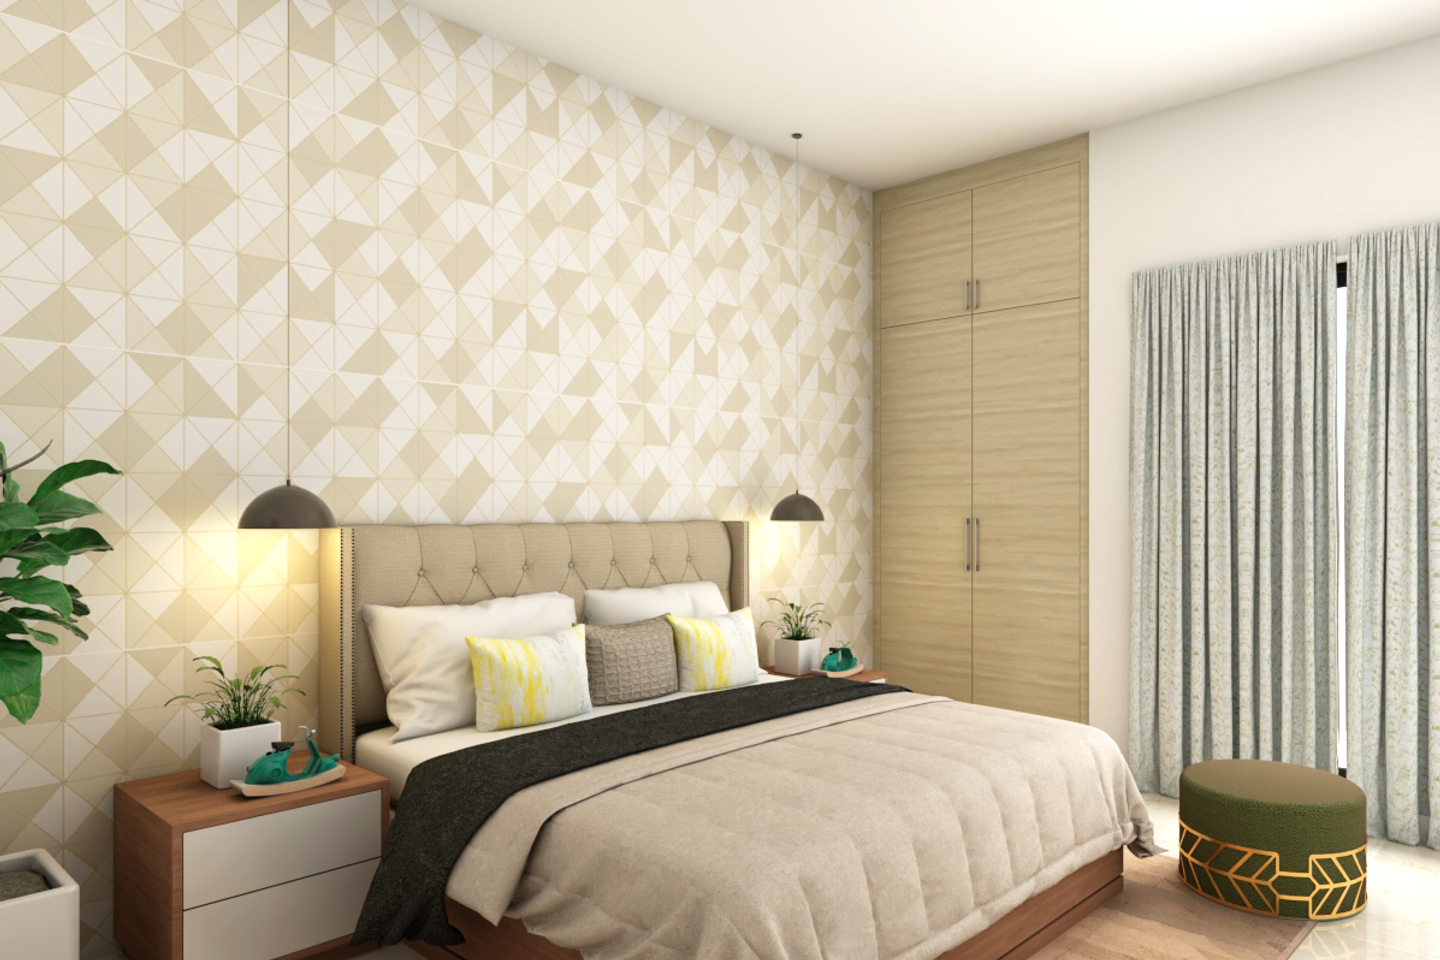 Modern Compact Master Bedroom Design with Floral Pattern - Livspace